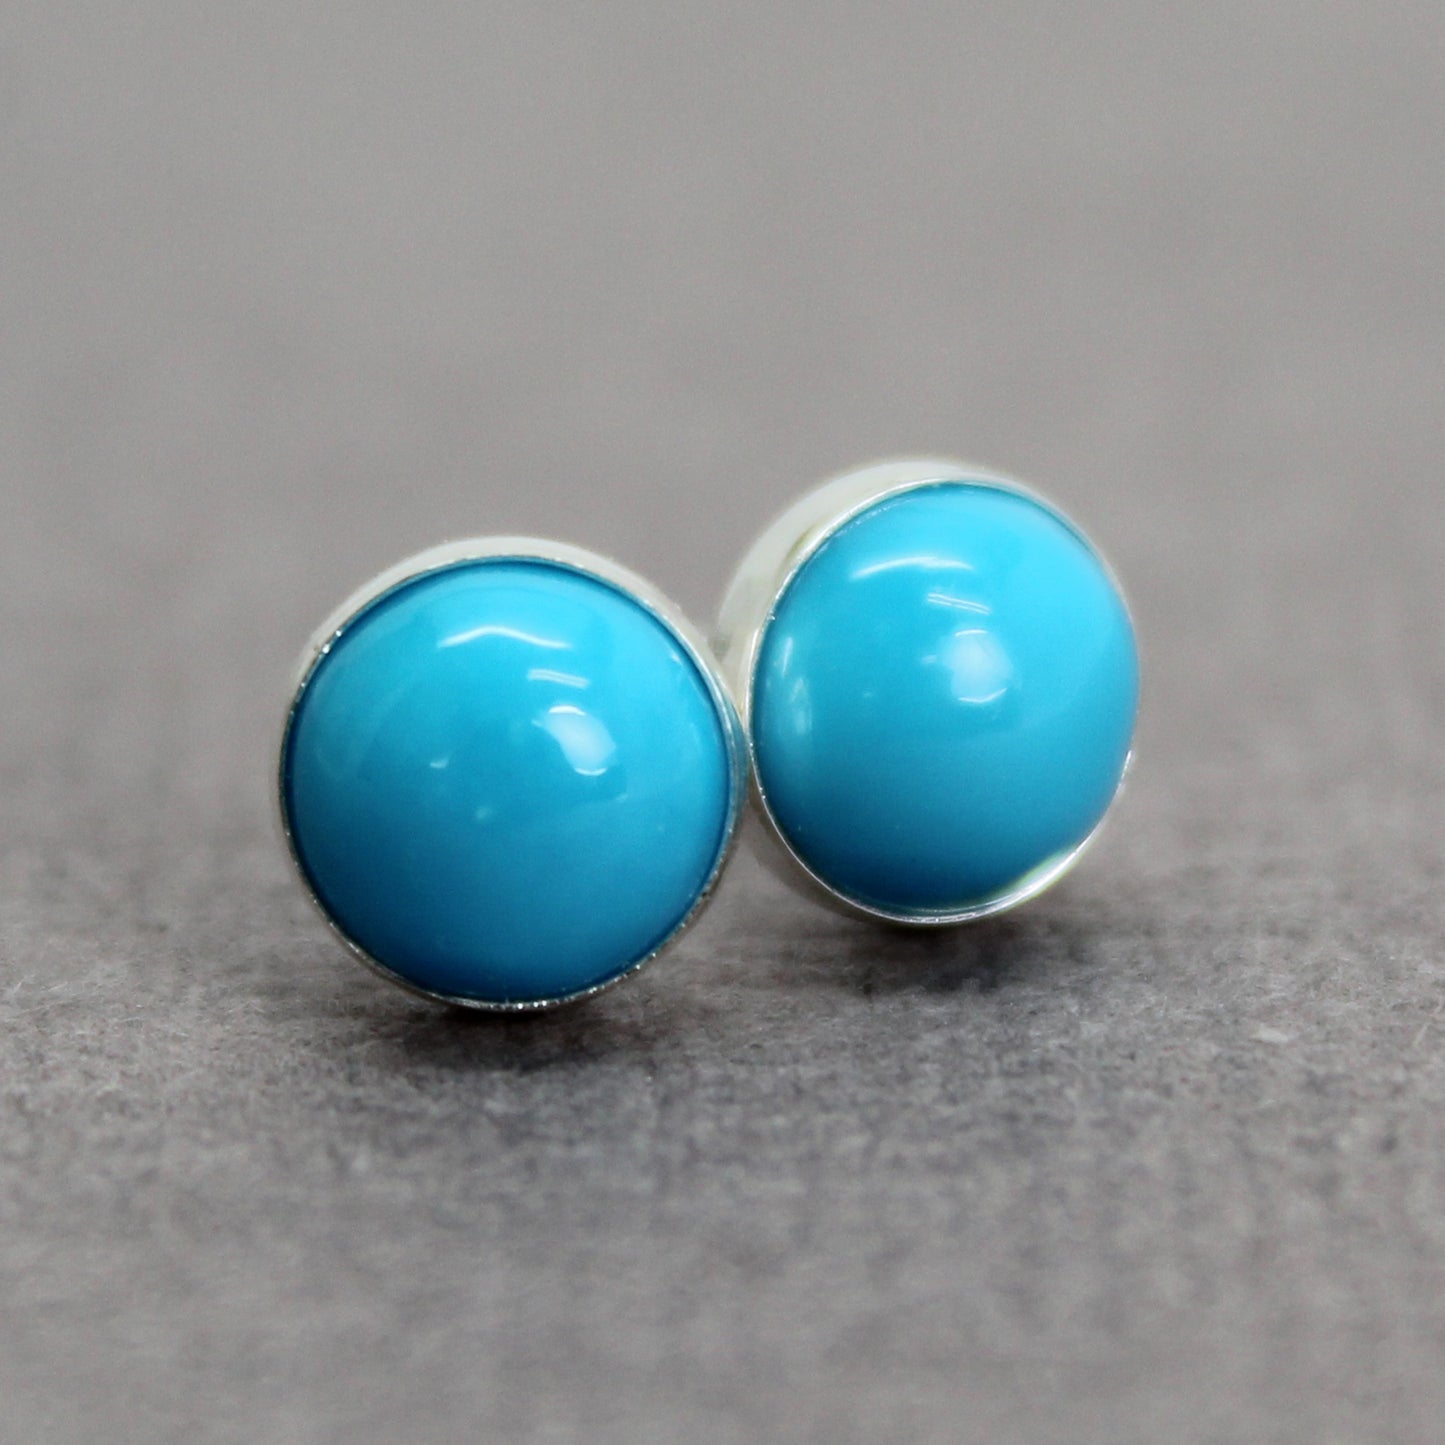 Turquoise Stud Earrings, 6mm Genuine Blue Turquoise in Sterling